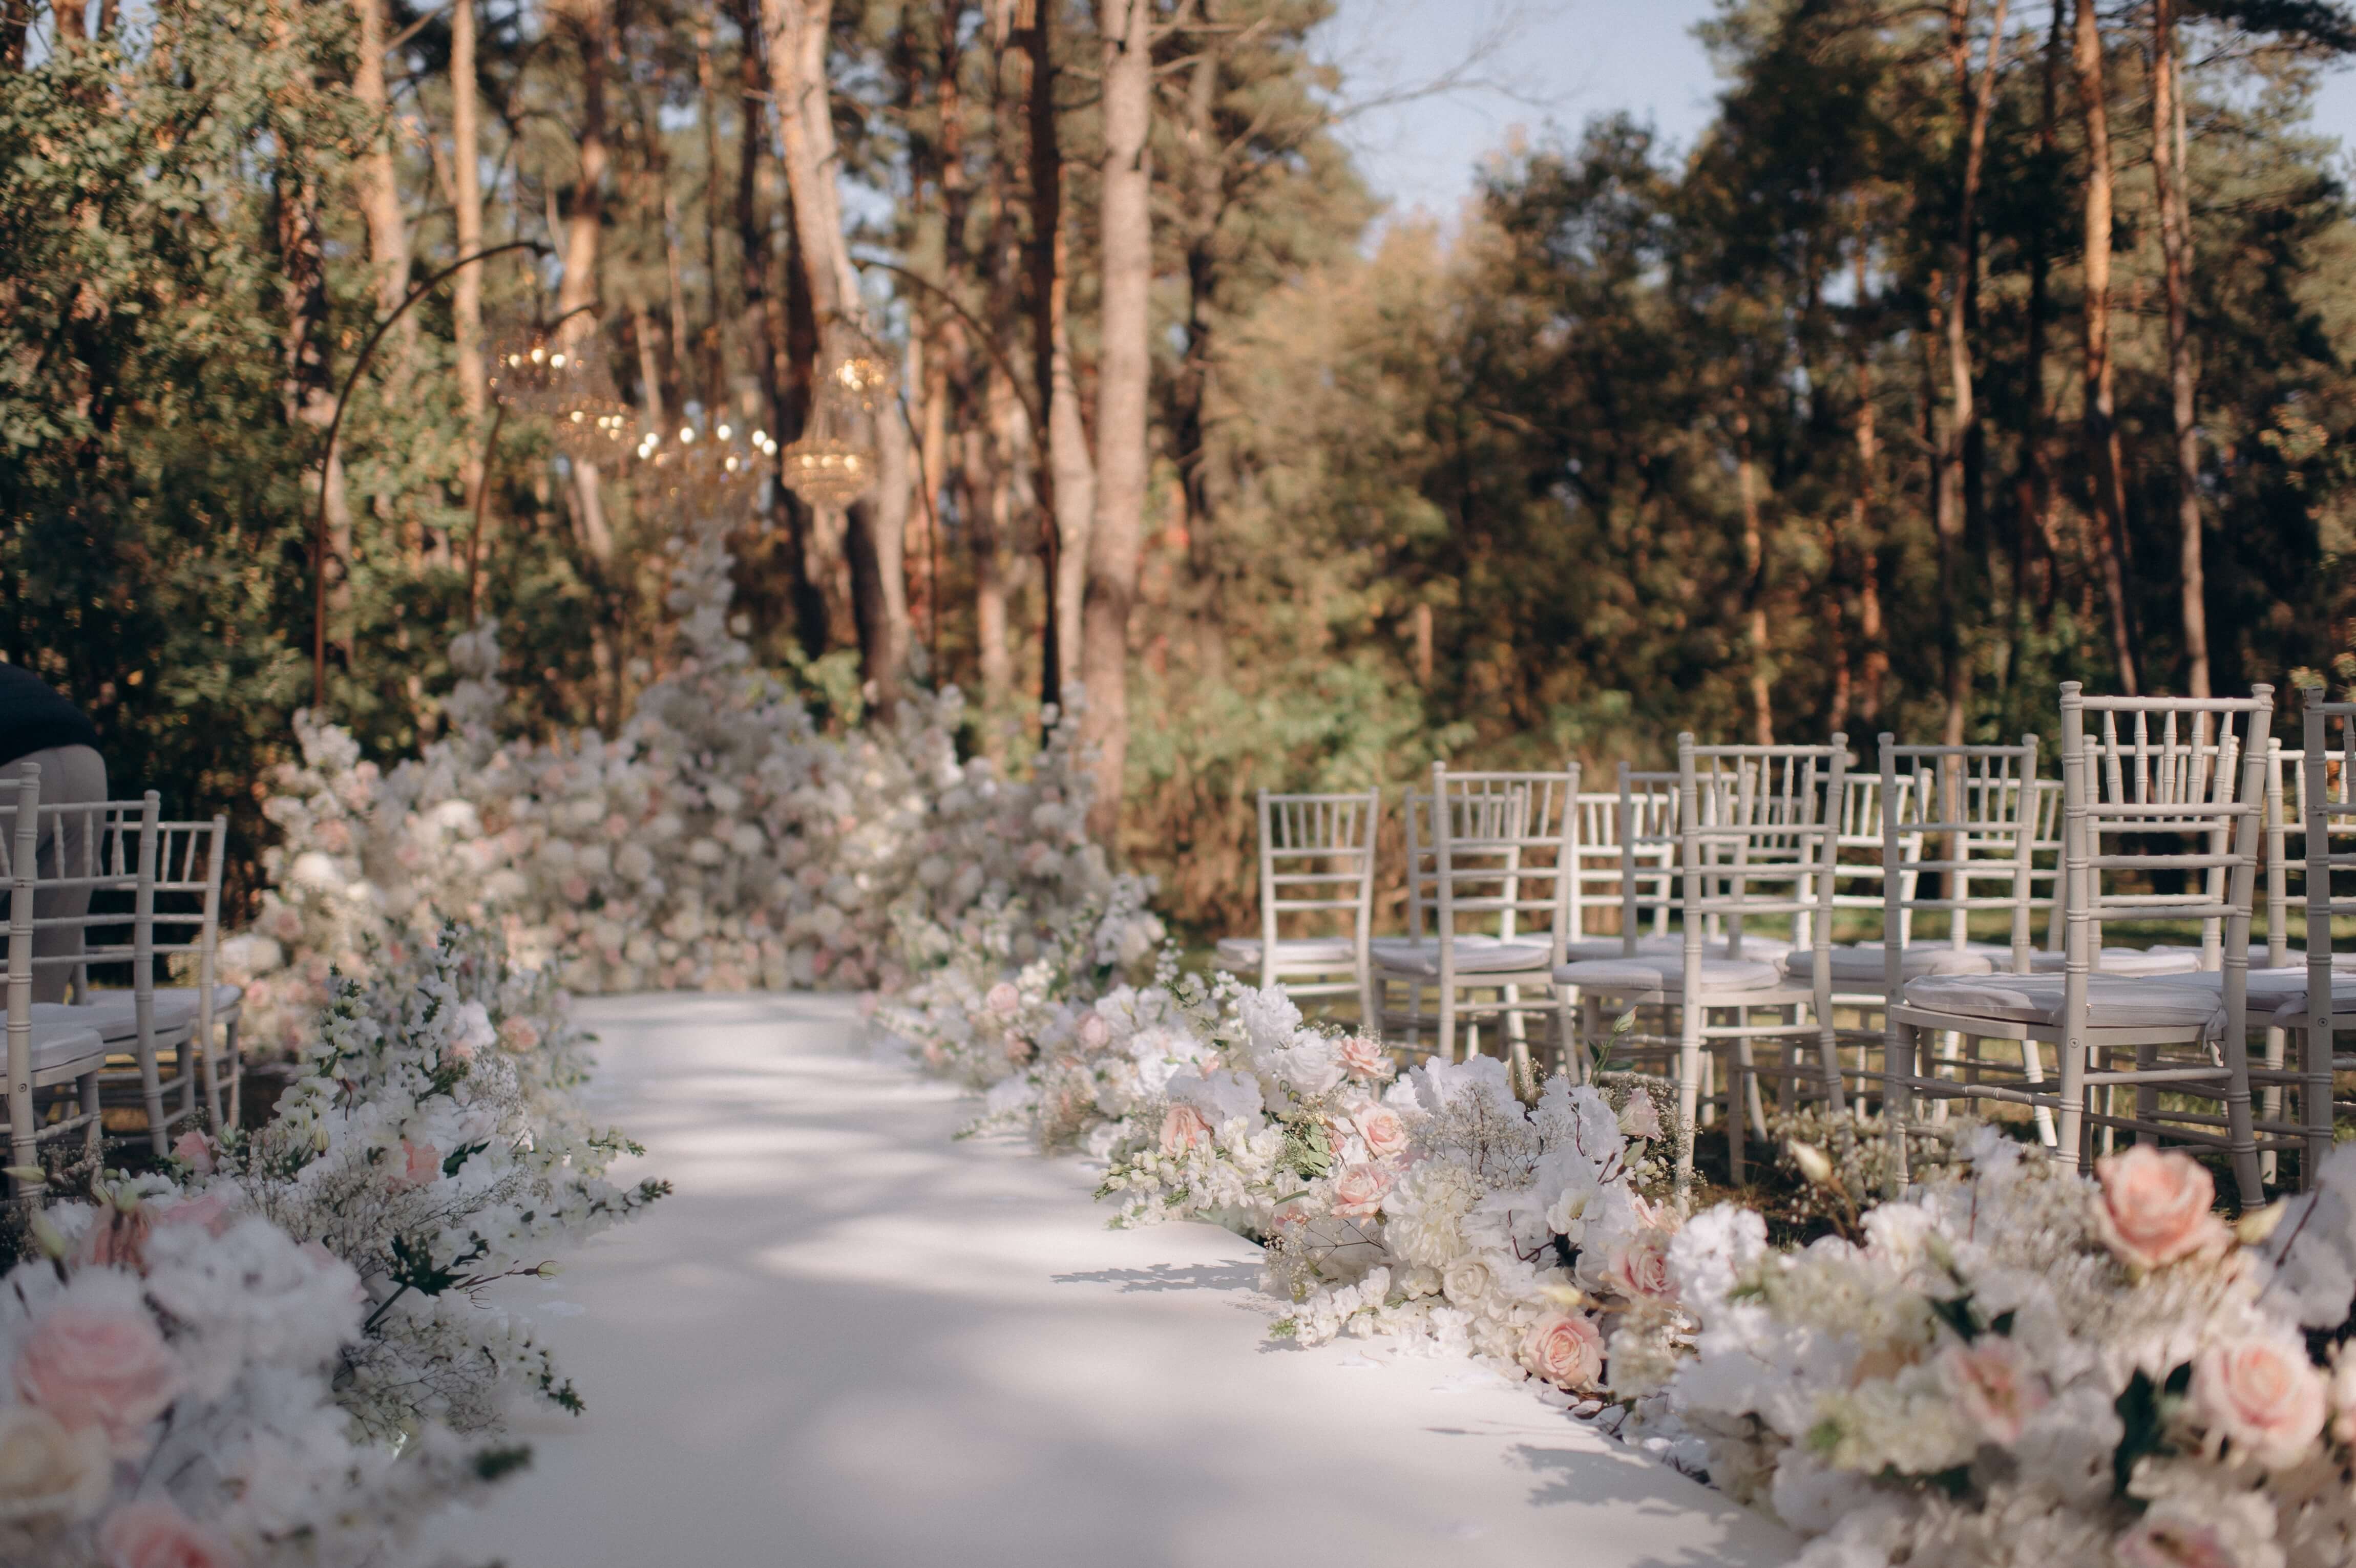 enchanted forest wedding ceremony with white chairs and aisle and pink and white florals